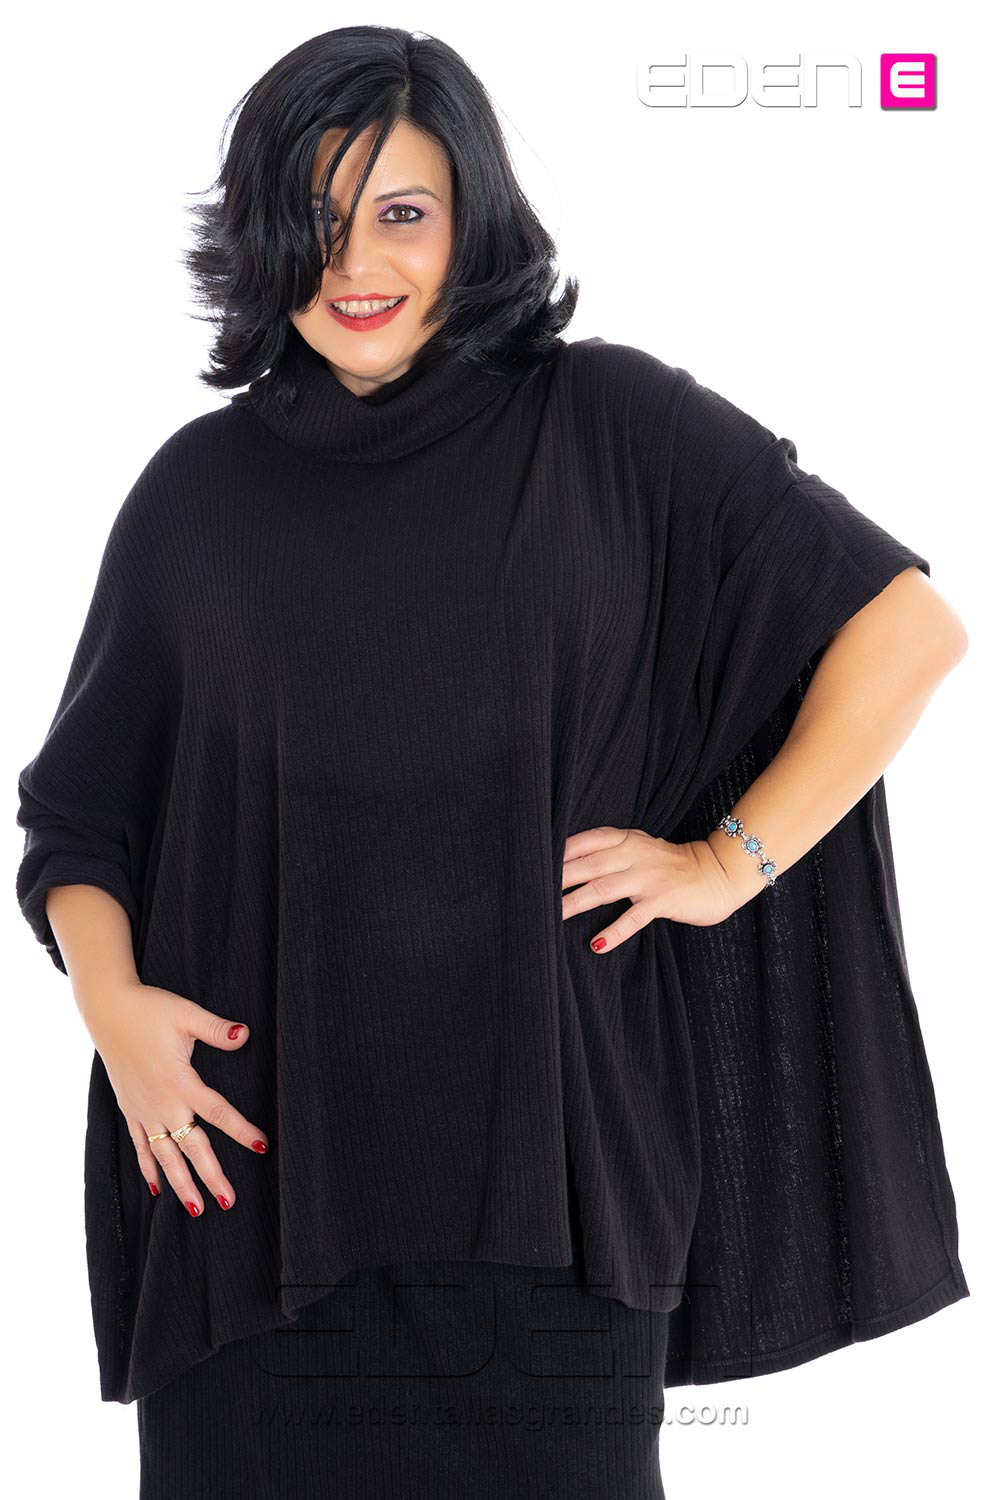 poncho-canale-negro-spg